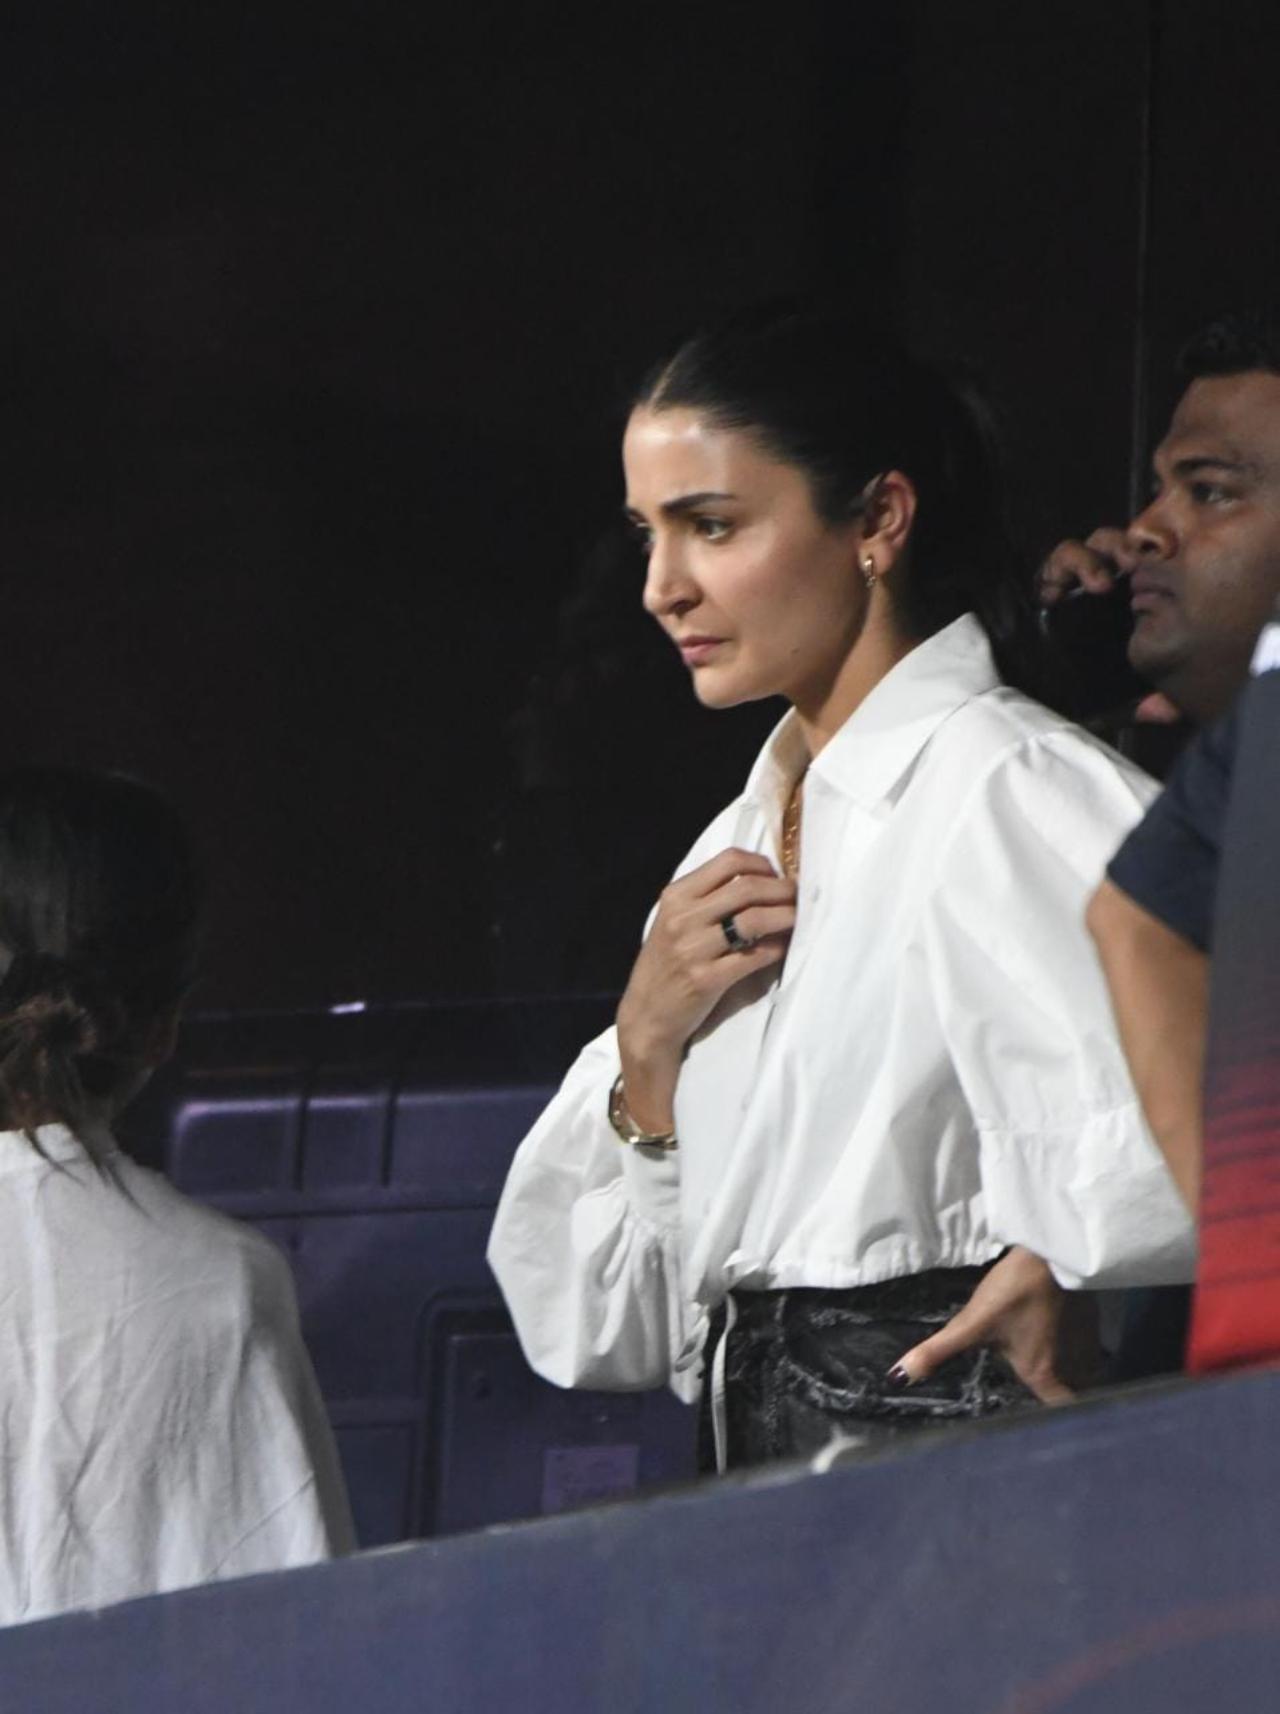 The 'PK' star who is gearing up for her upcoming sports drama, 'Chakda Express' was engrossed in the match completely. 